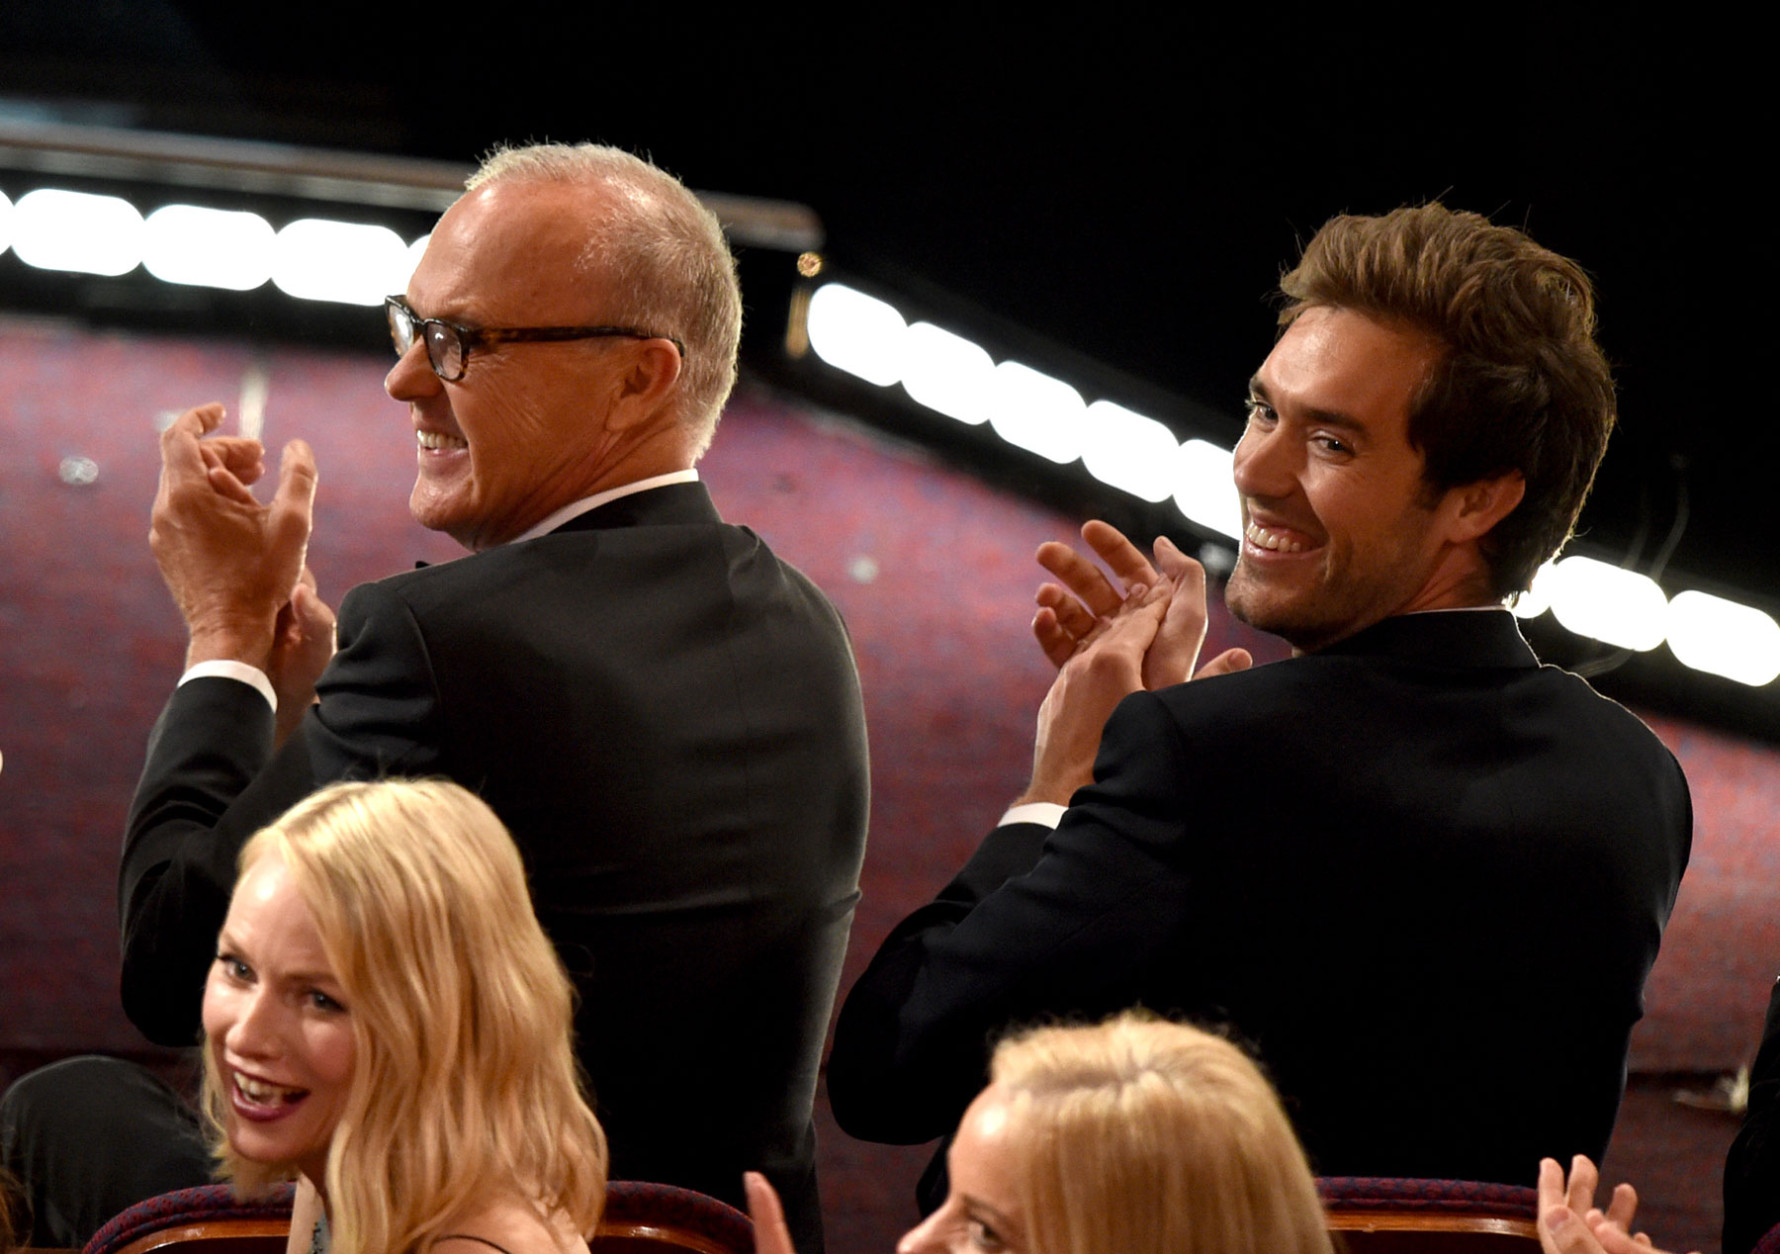 Michael Keaton, left, and Sean Douglas are seen in the audience at the Oscars on Sunday, Feb. 22, 2015, at the Dolby Theatre in Los Angeles. (Photo by John Shearer/Invision/AP)